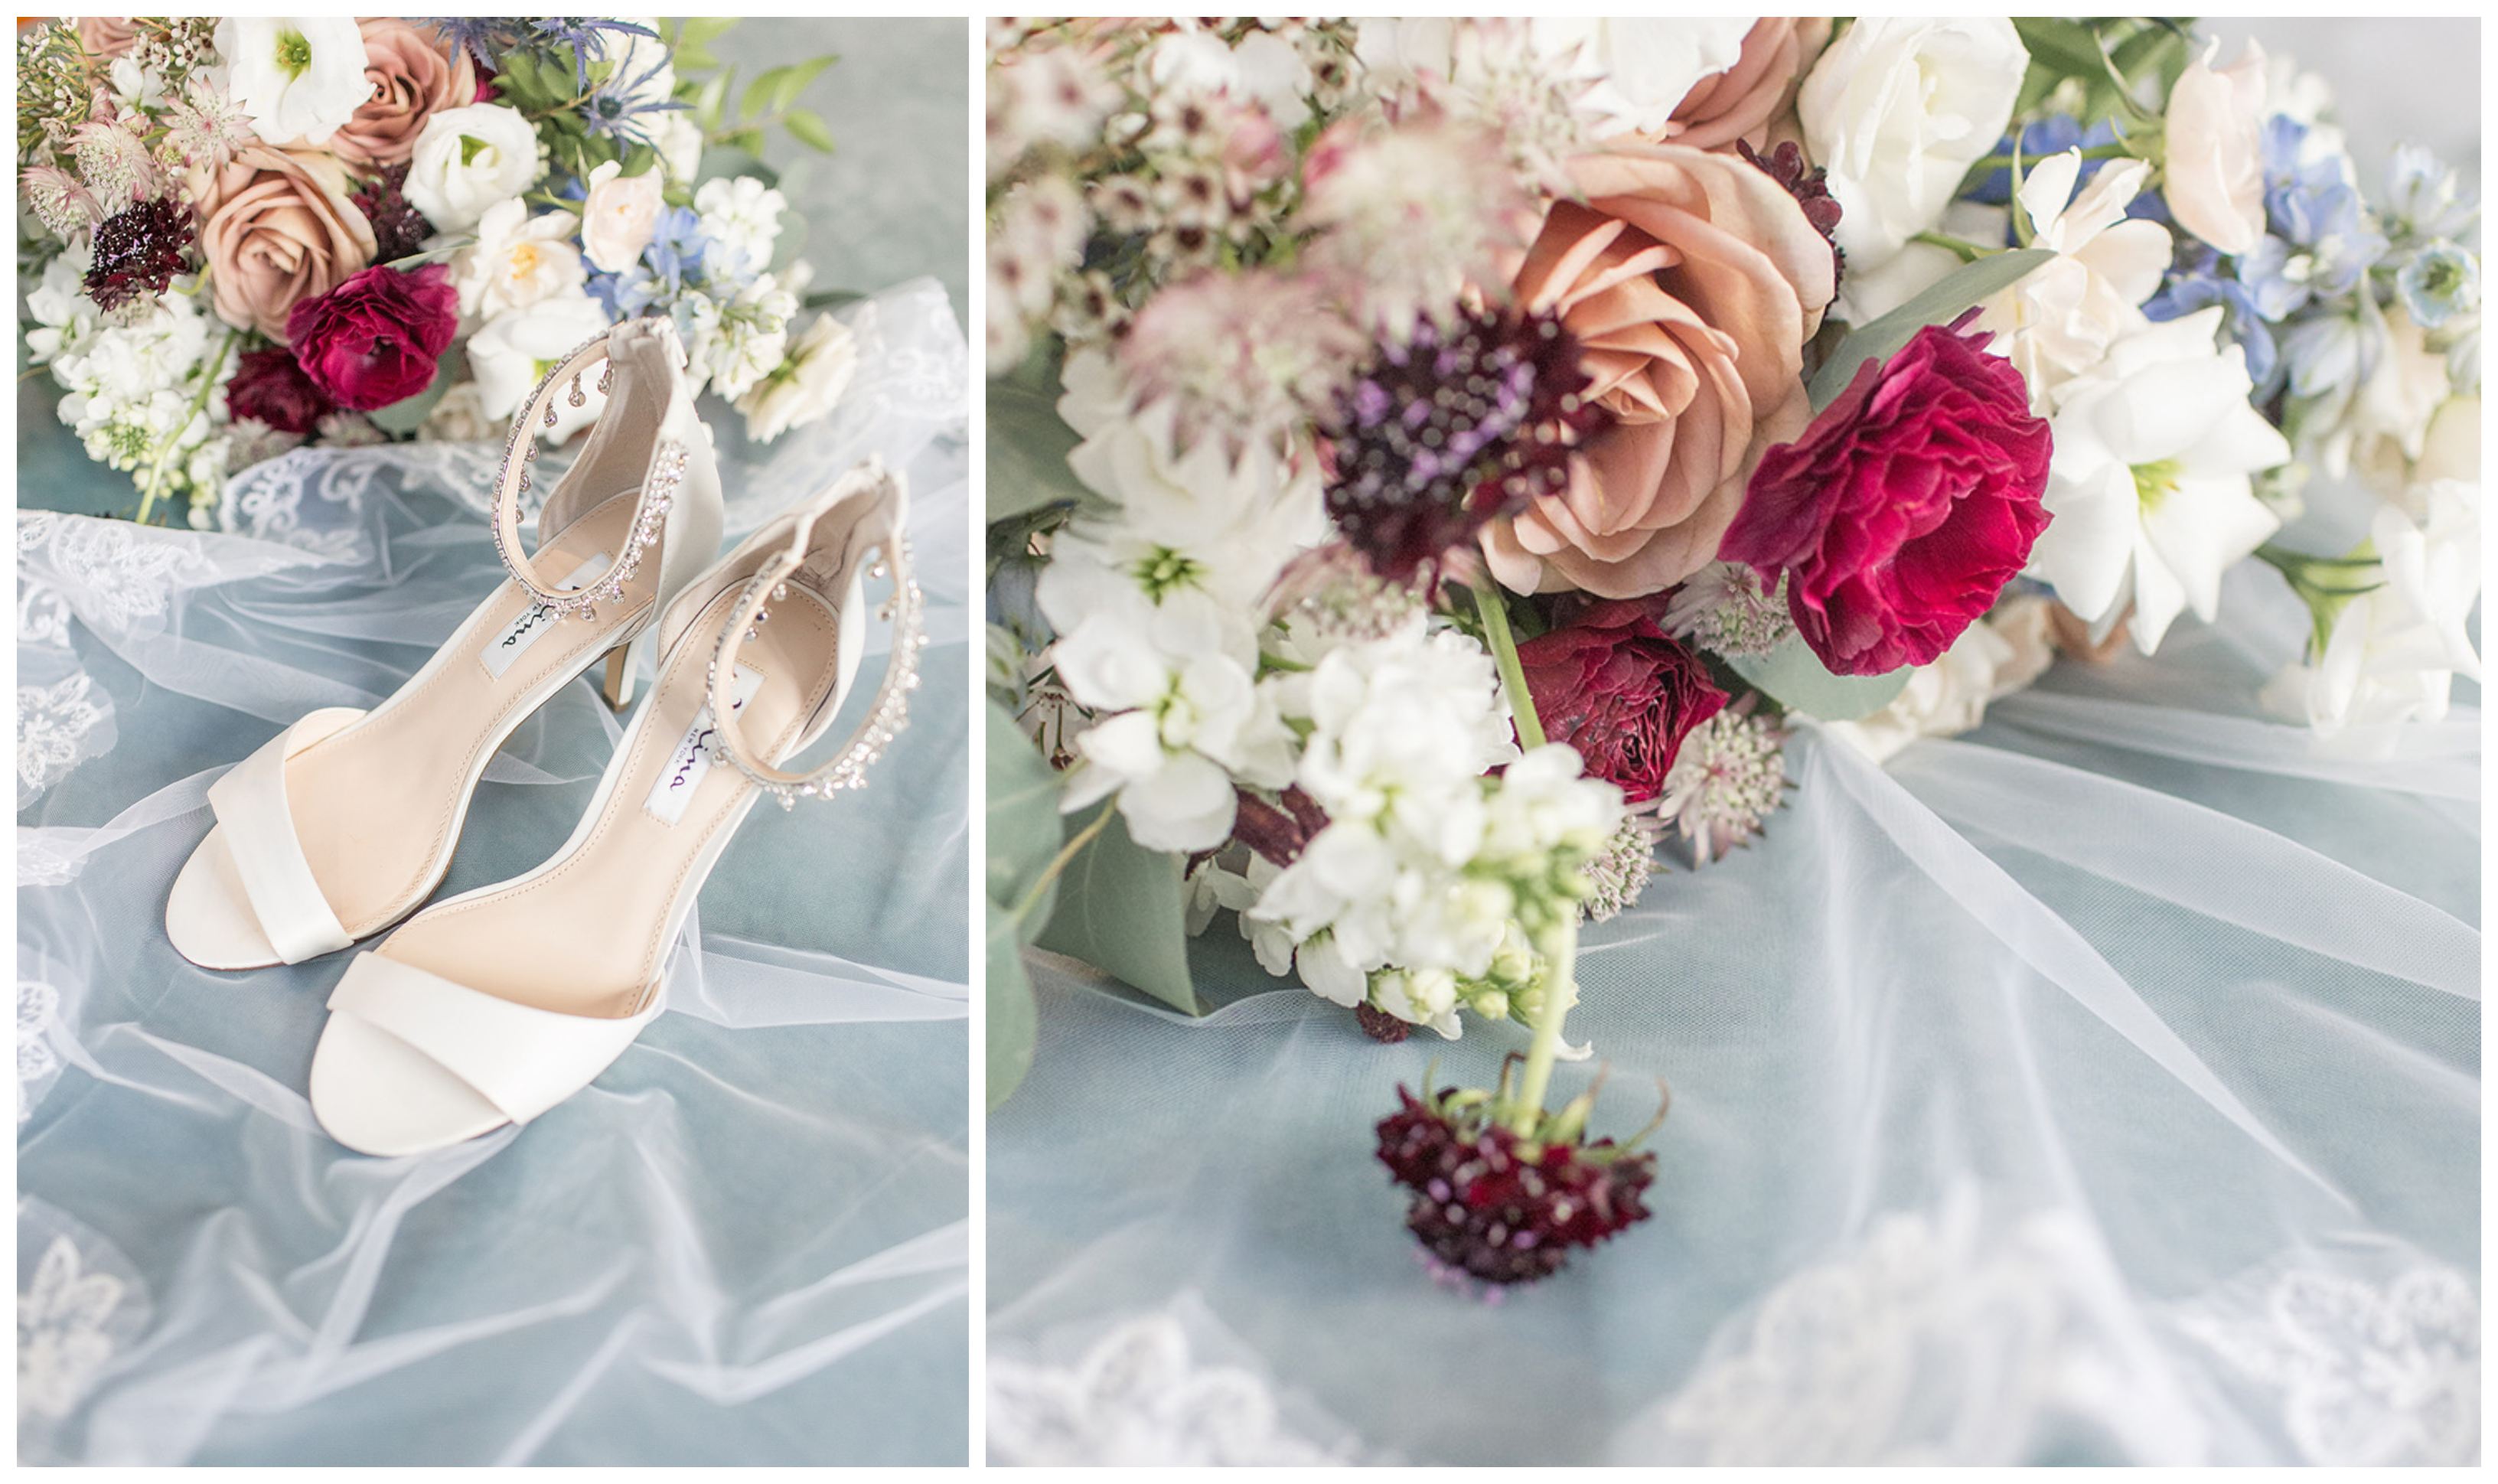 Bride's bouquet and heels at David's Country Inn